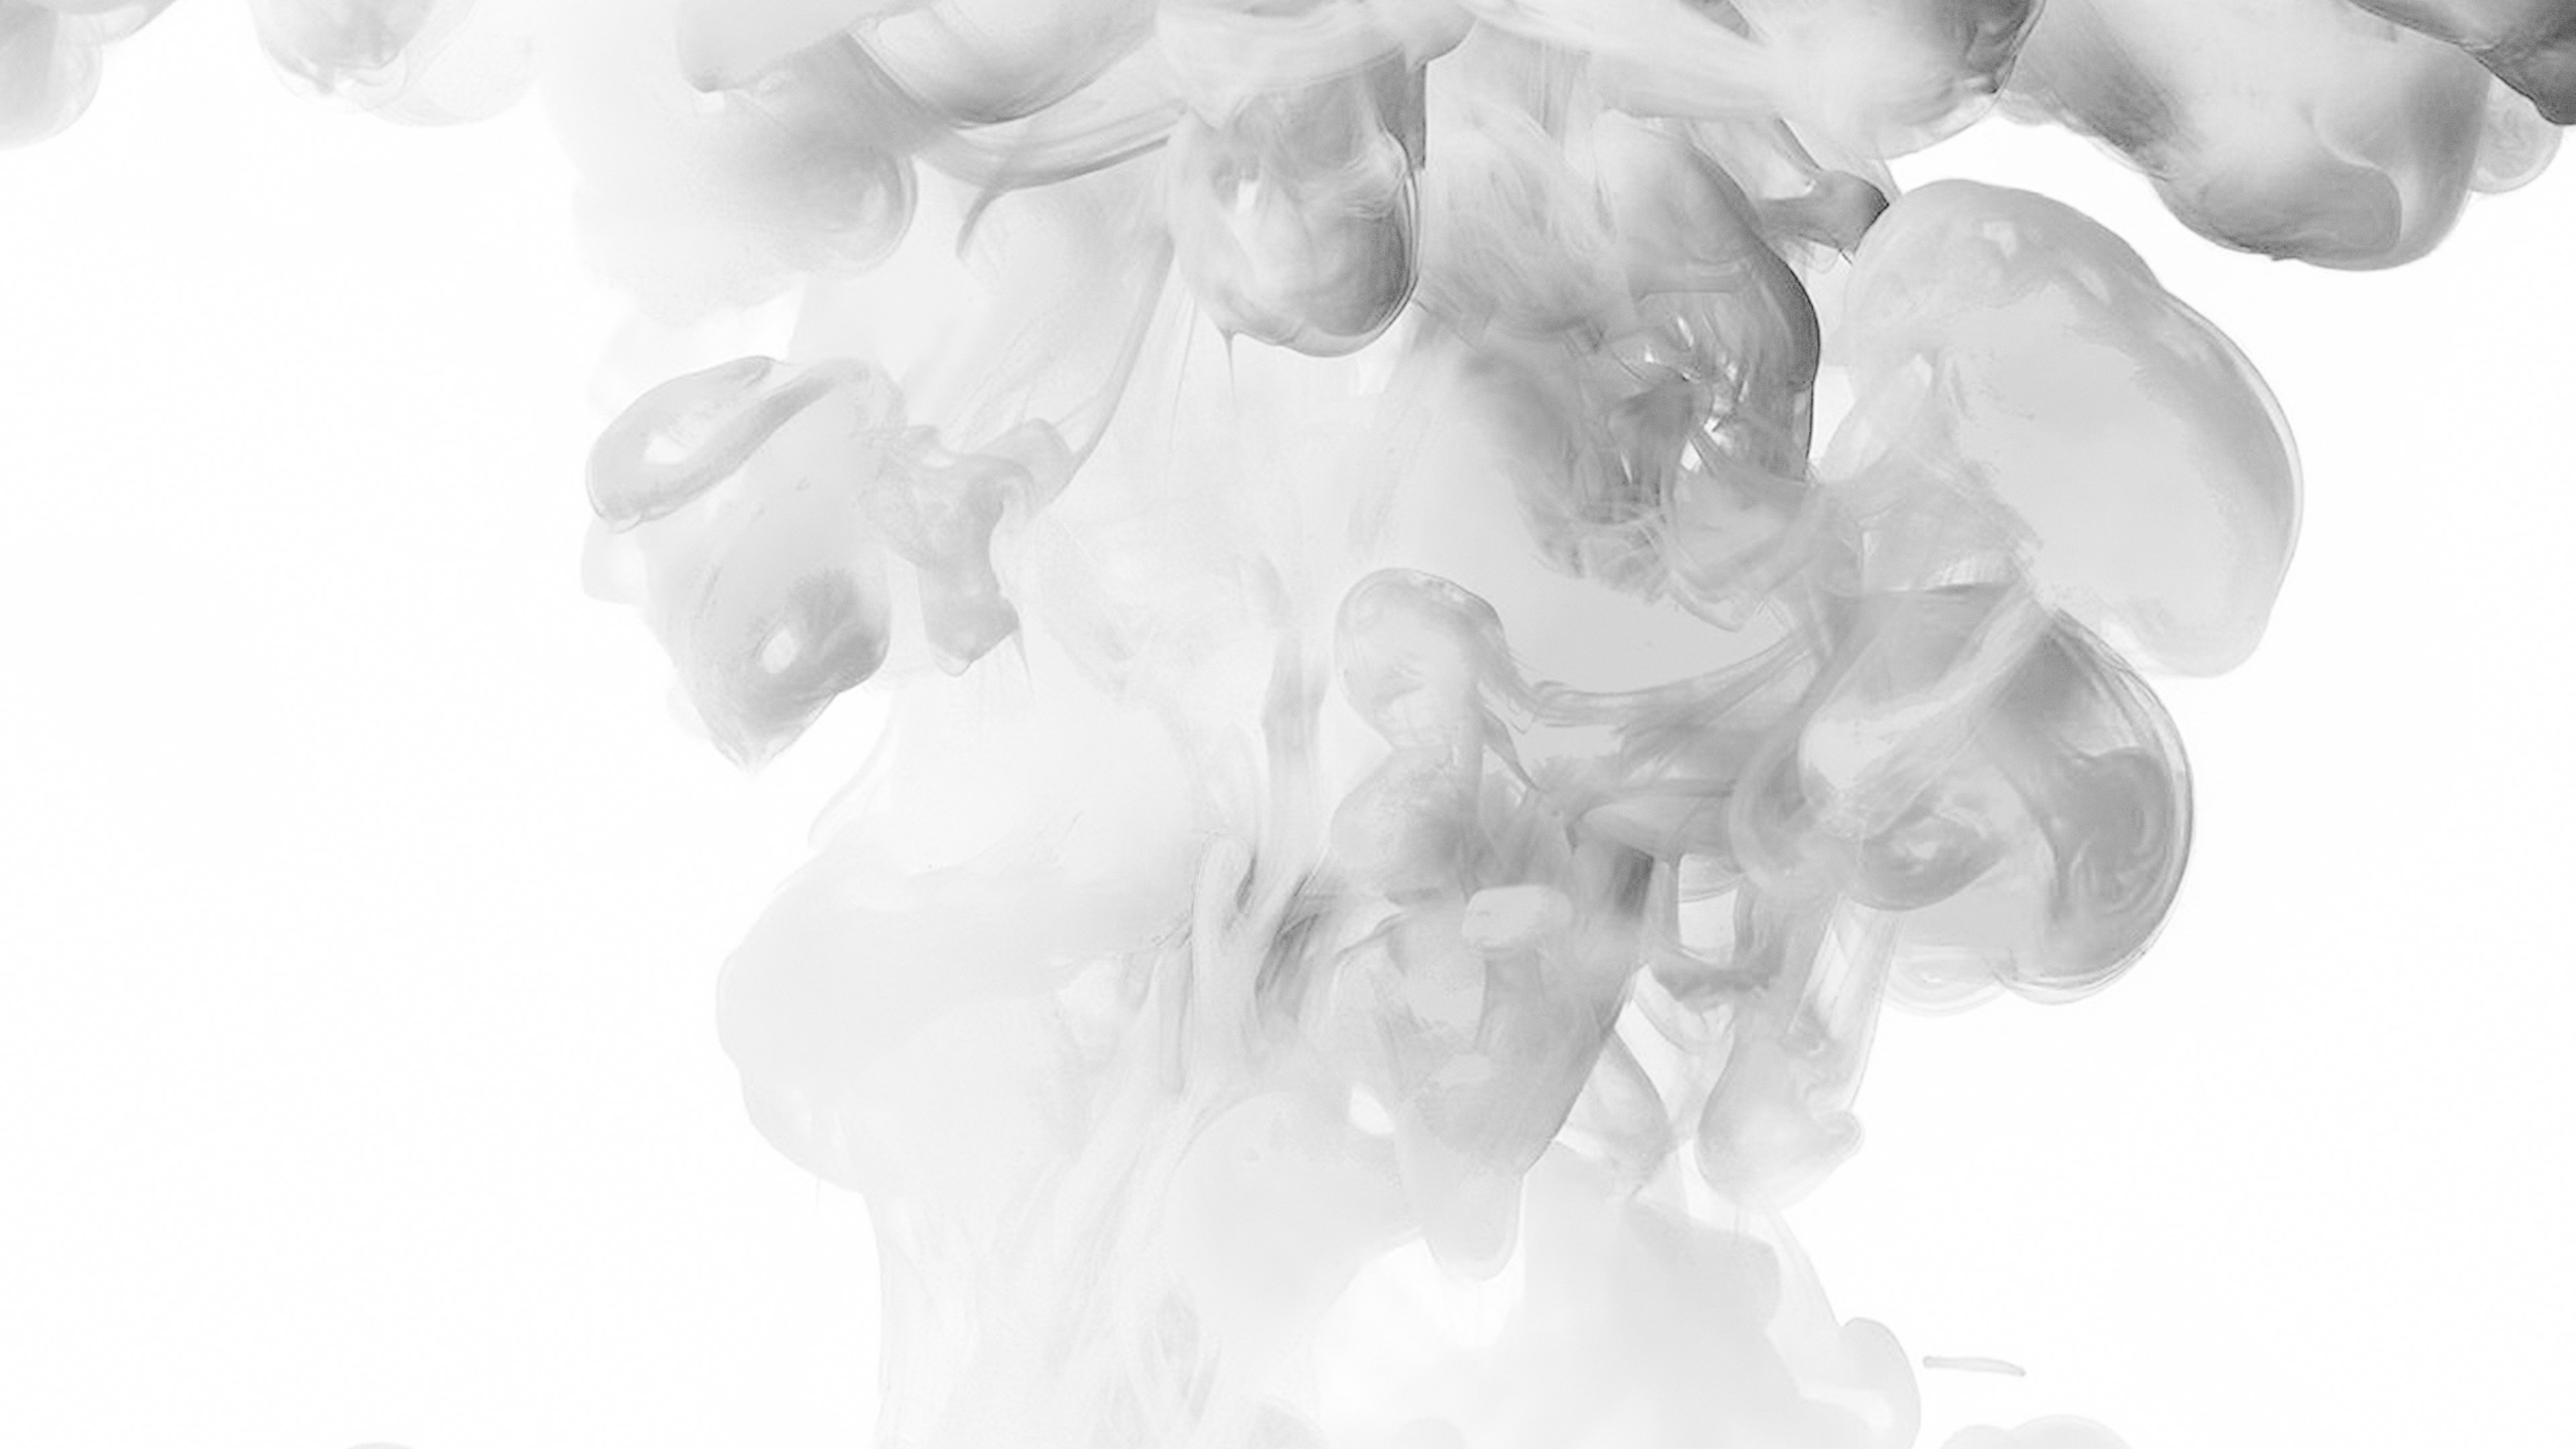 I Love Papers | am73-smoke-white-bw-abstract-fog-art-illust